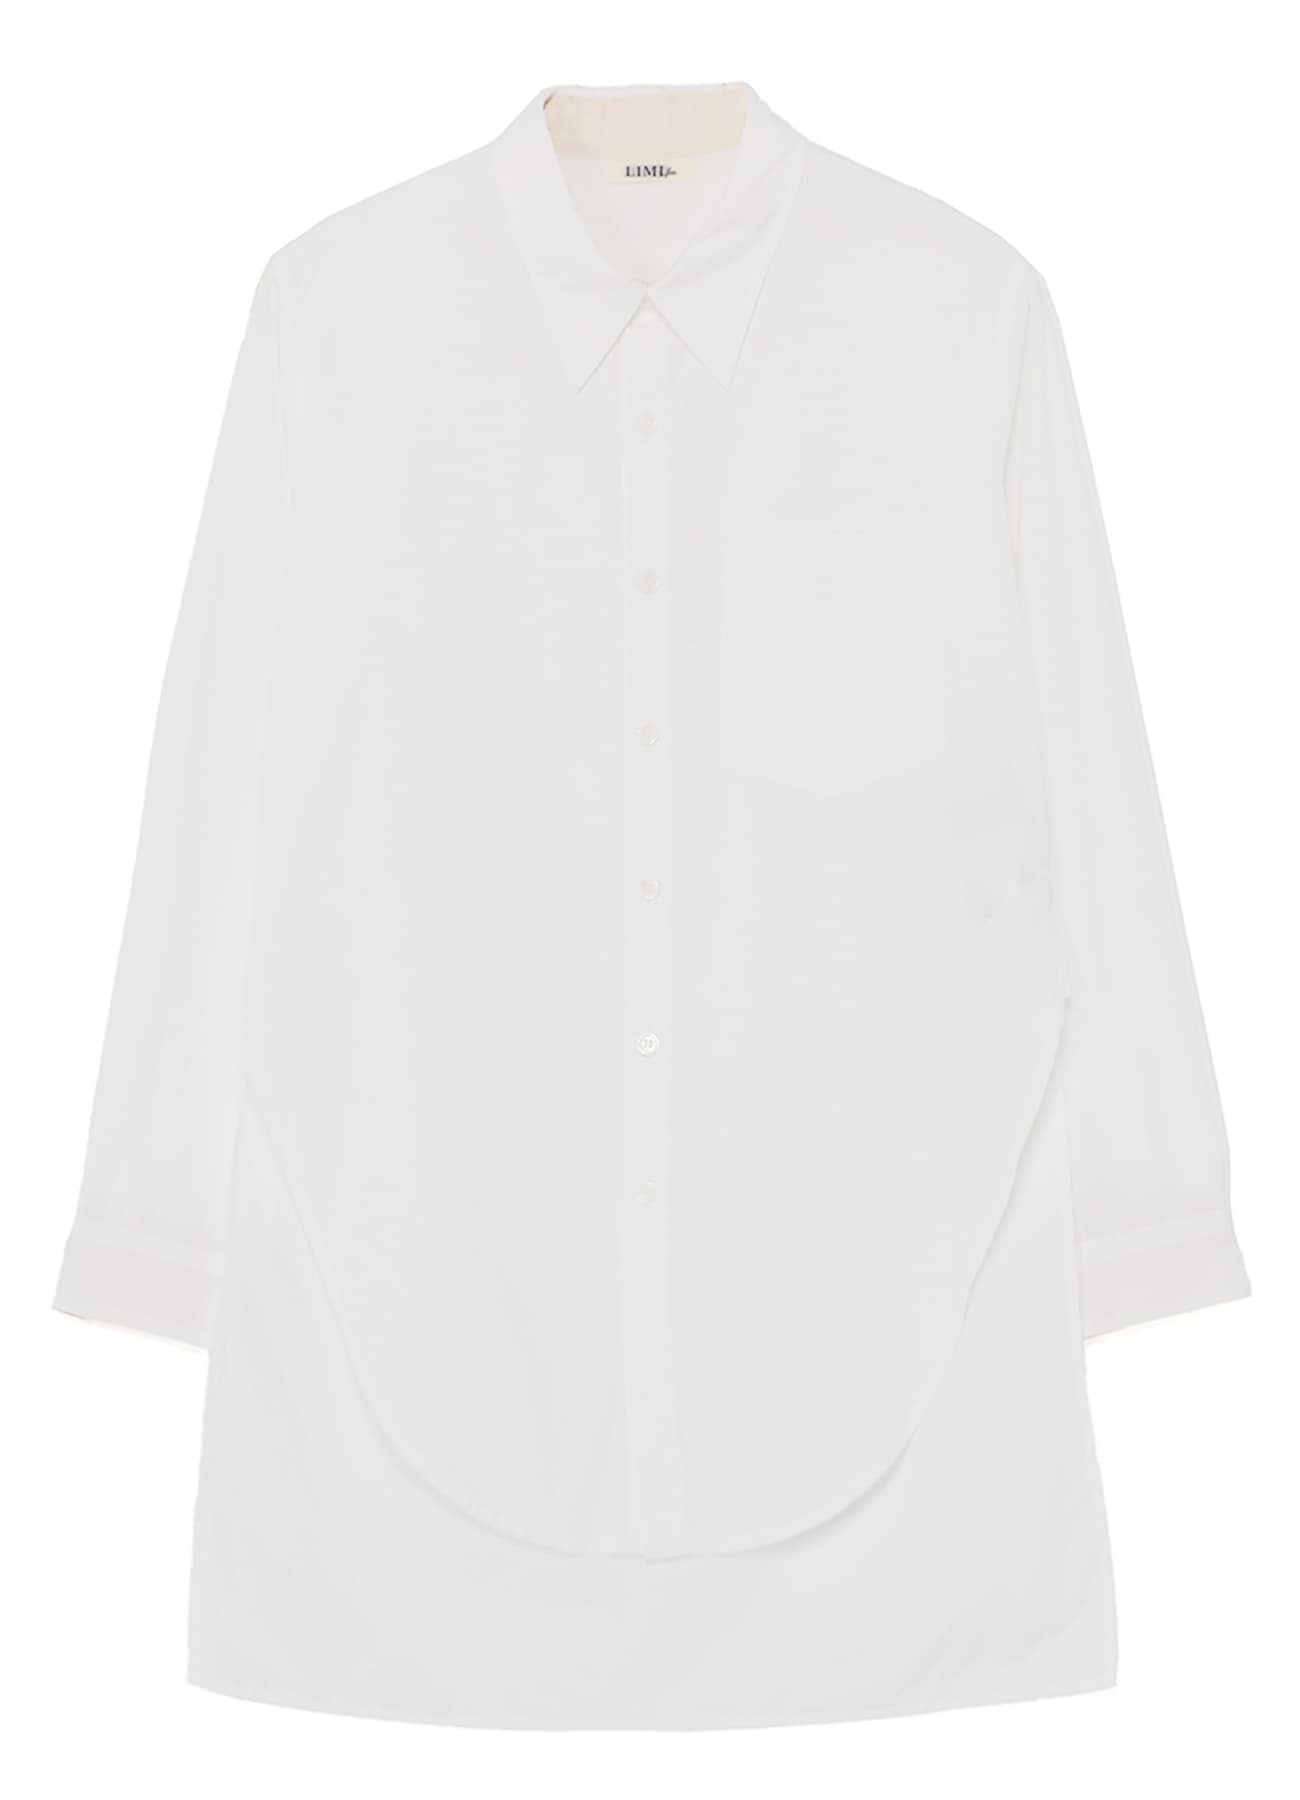 COTTON BROADCLOTH SHIRT WITH ROUND FRONT HEM